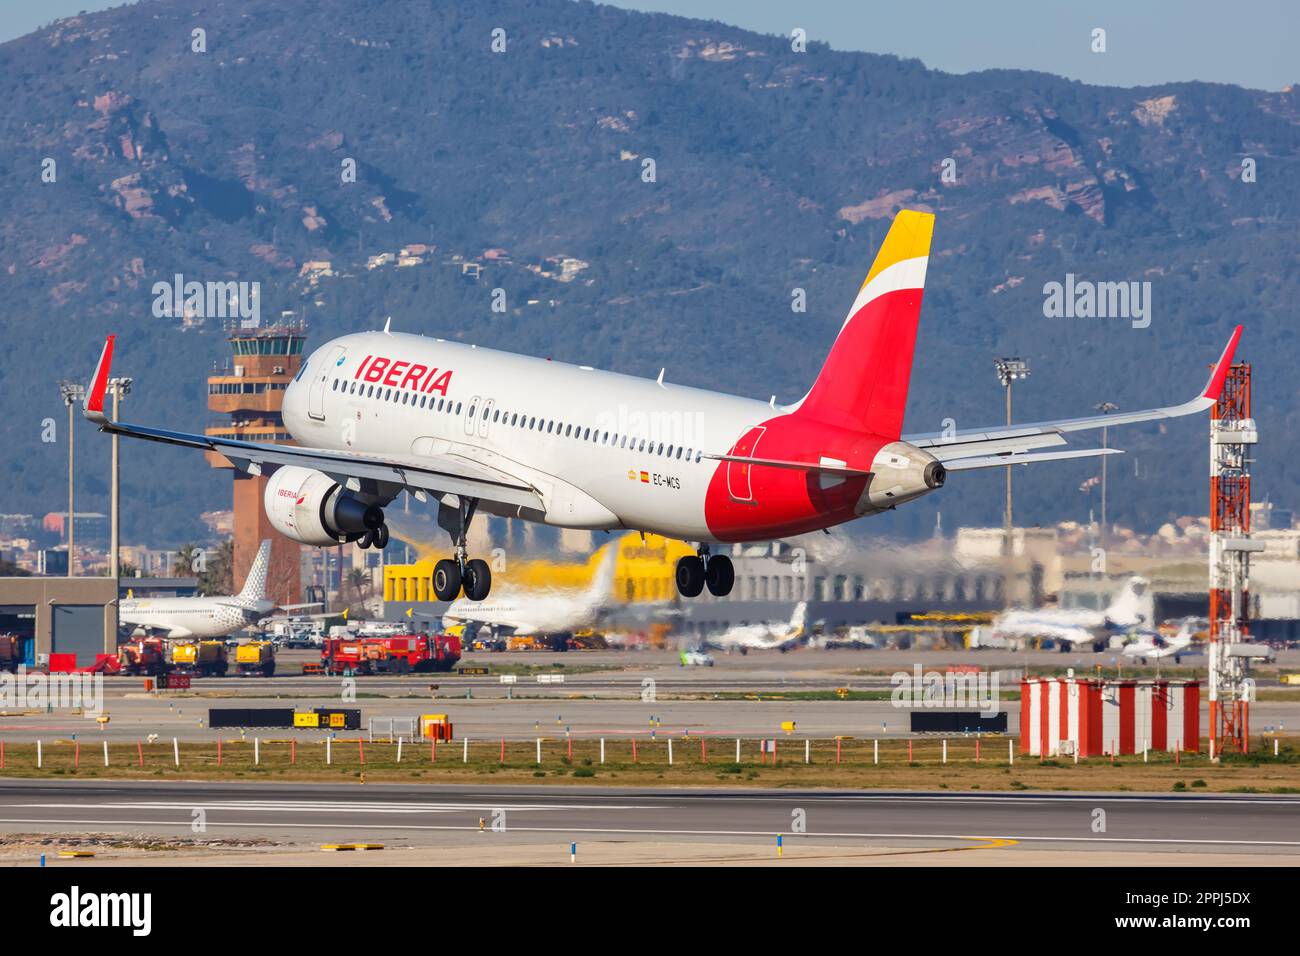 Iberia Airbus A320 airplane Barcelona airport in Spain Stock Photo